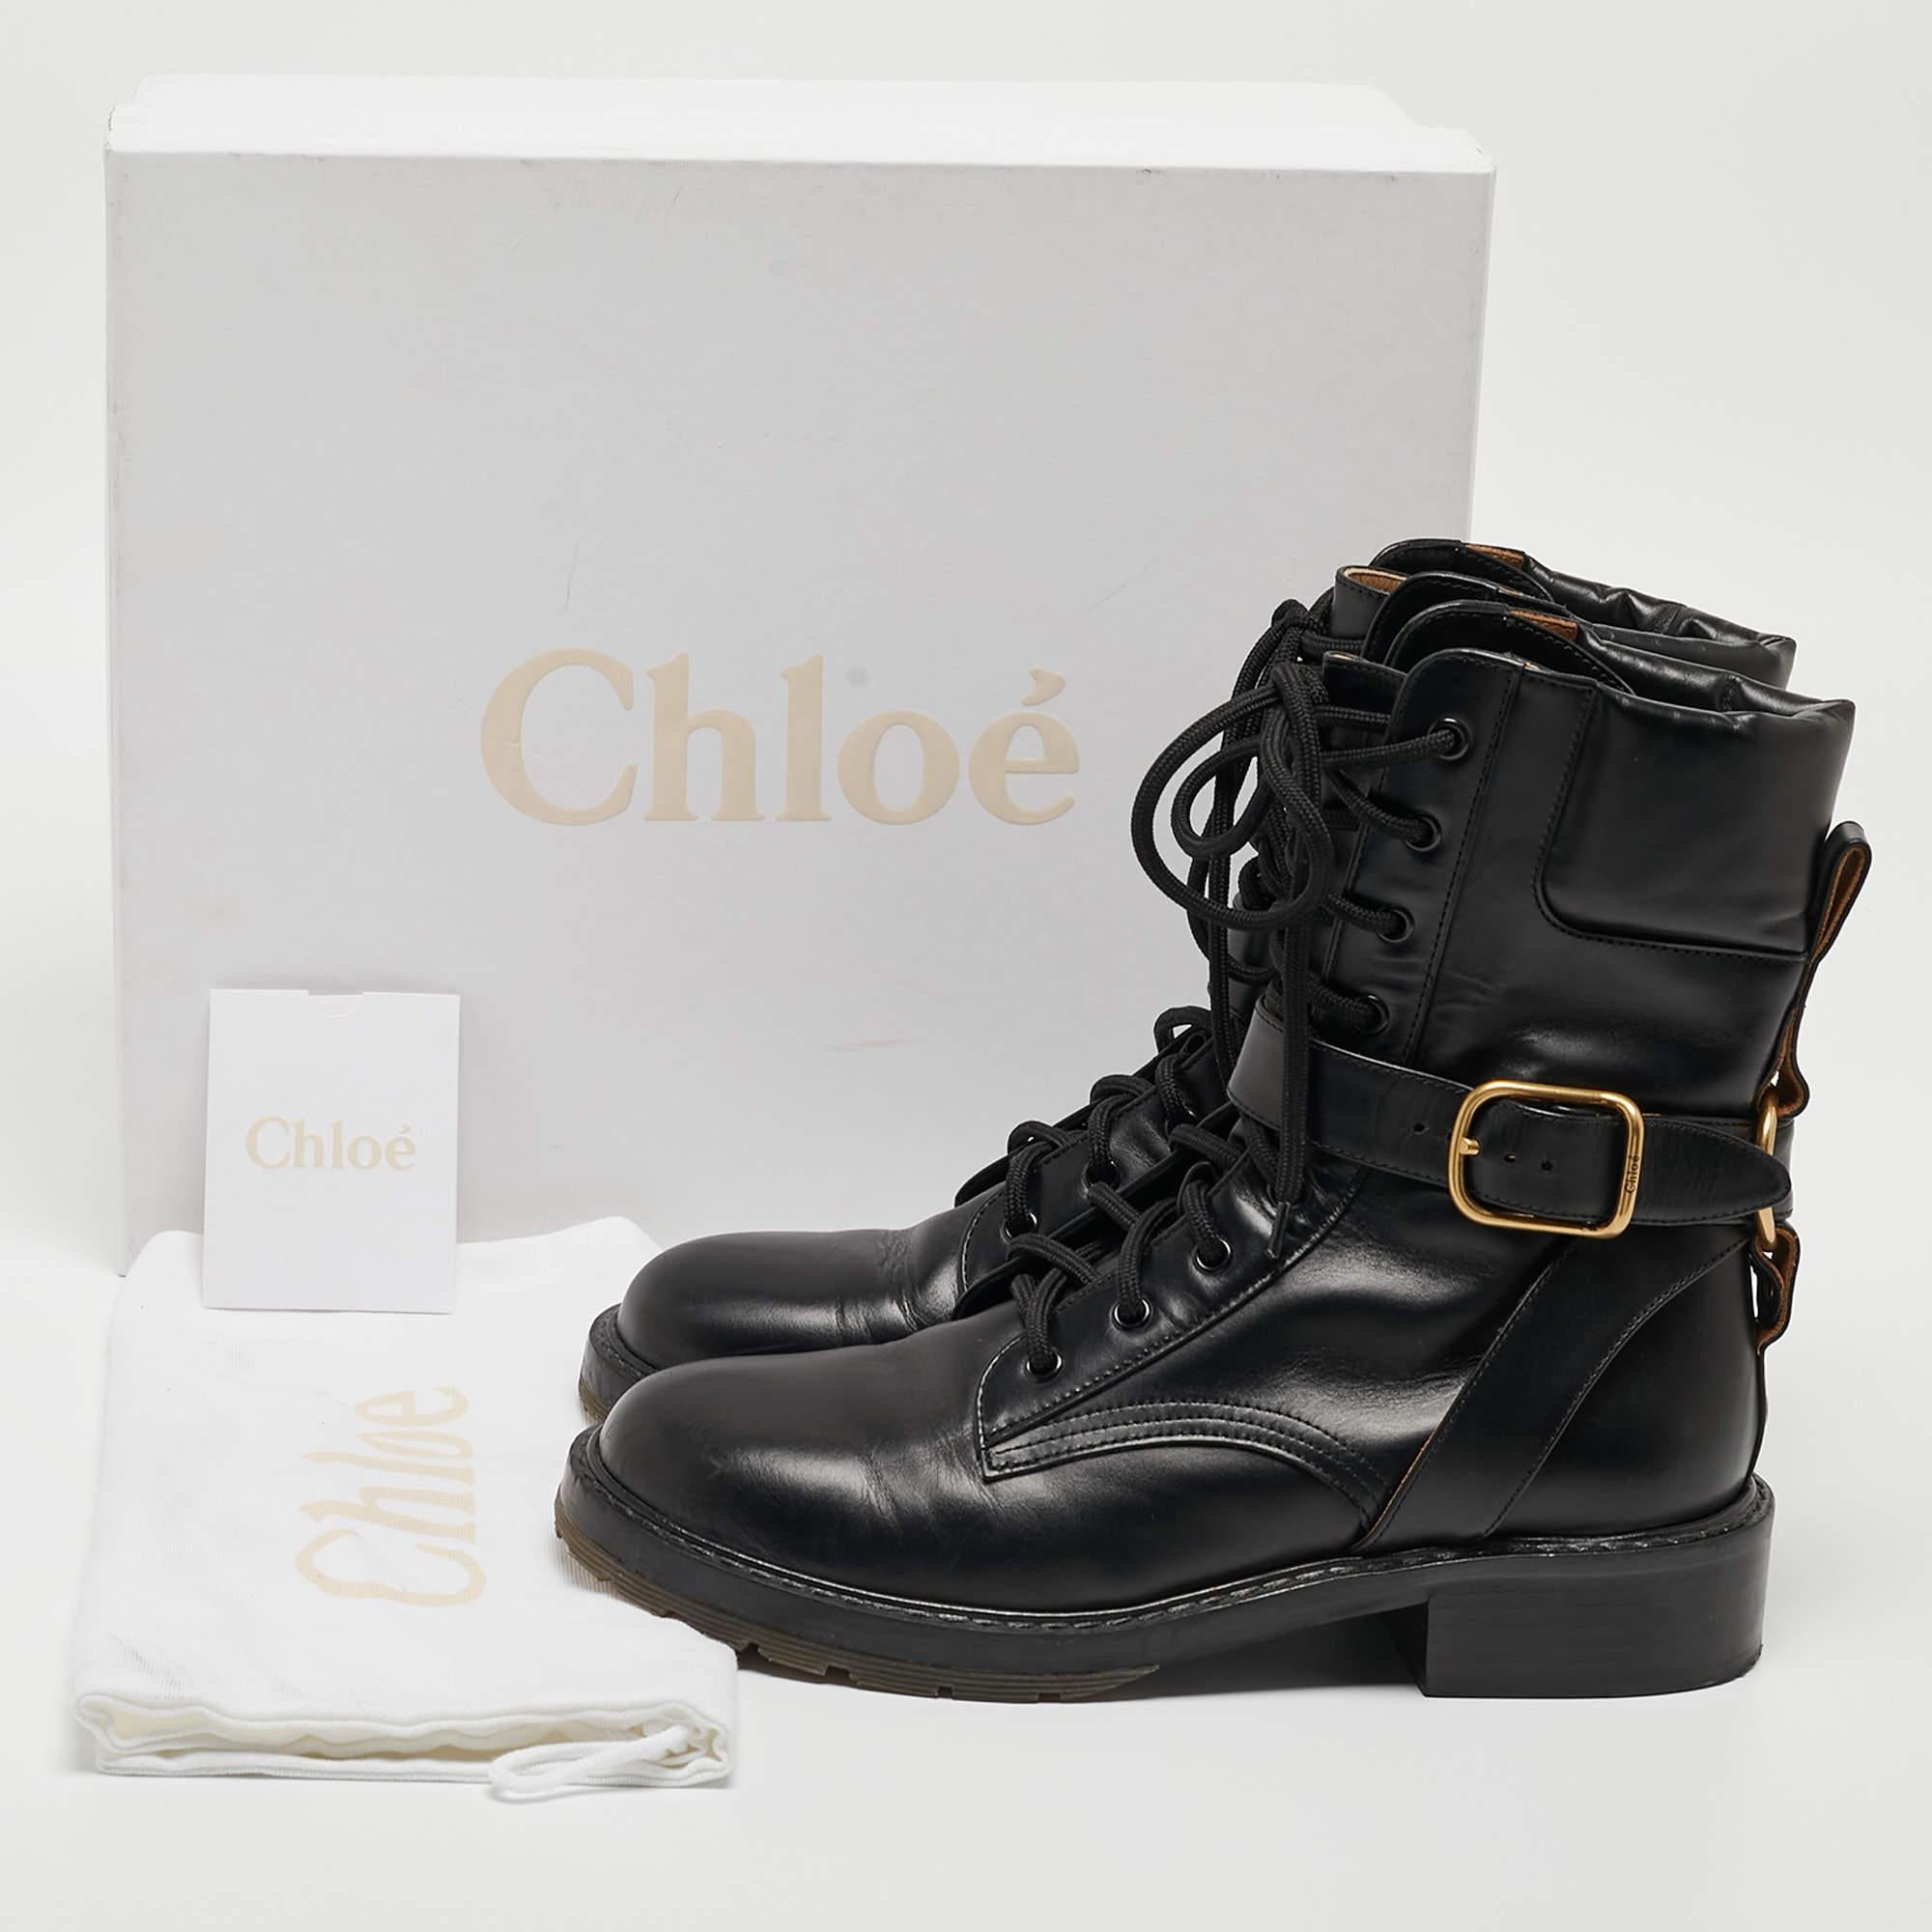 Chloe Black Leather Ankle Boots Size 40.5 5